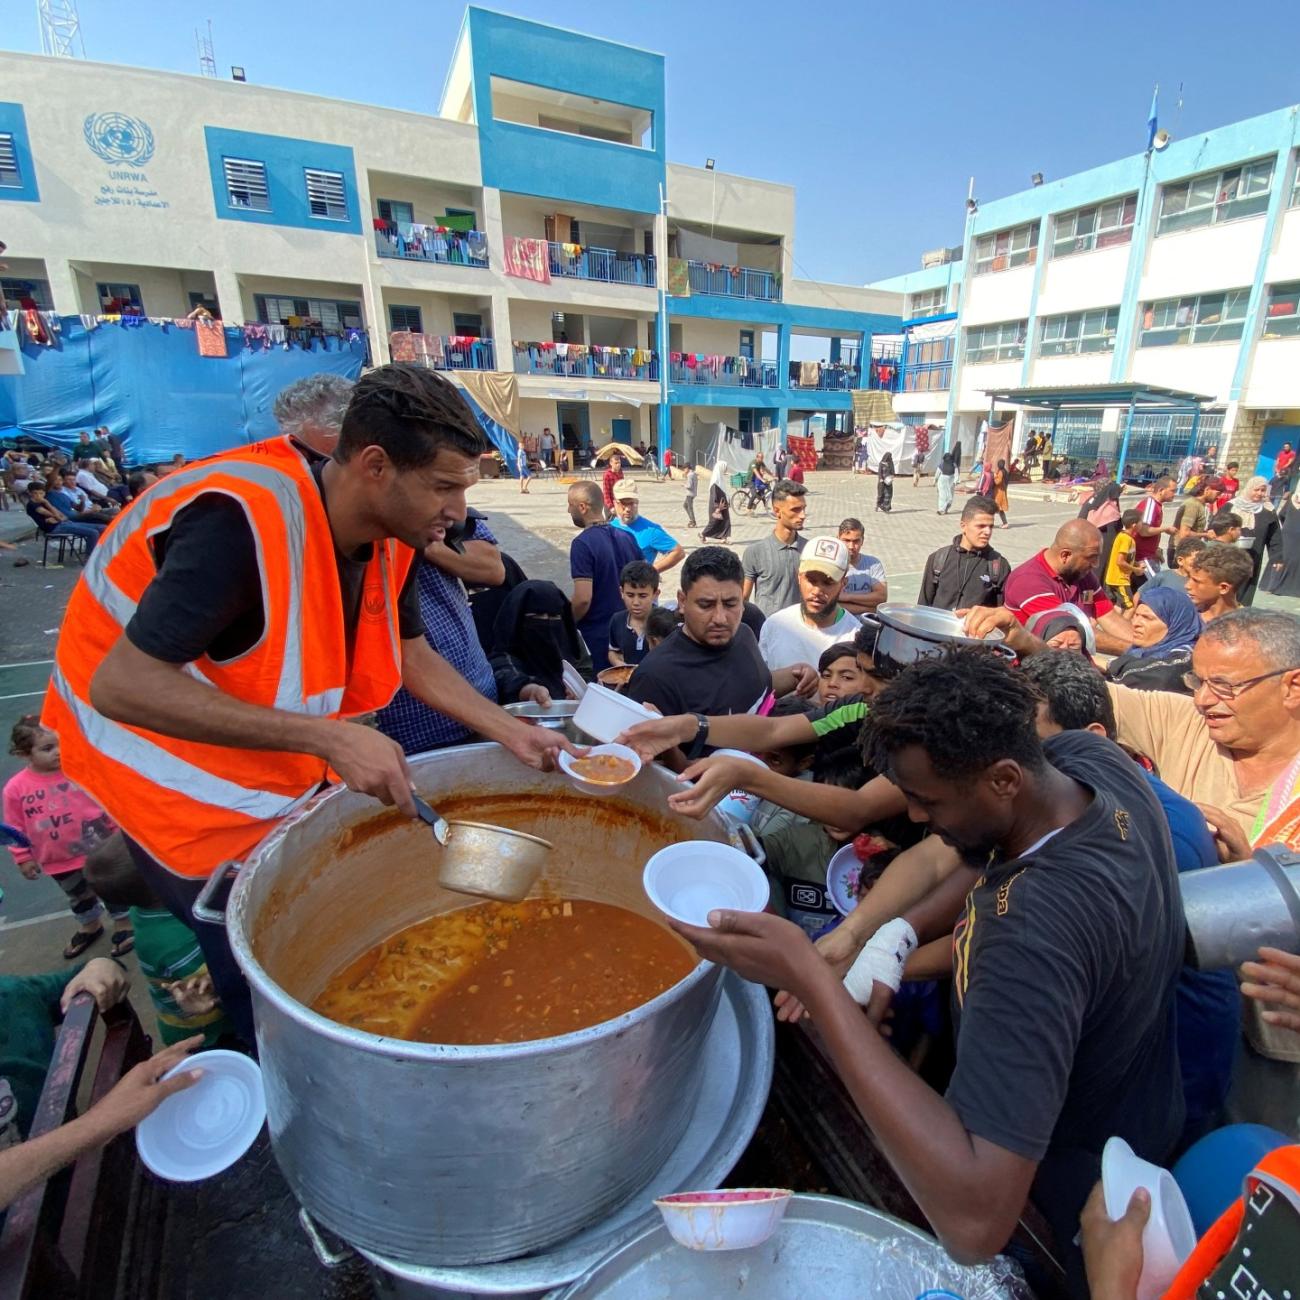 Palestinians, who fled their houses due to Israeli strikes, gather to get their share of charity food